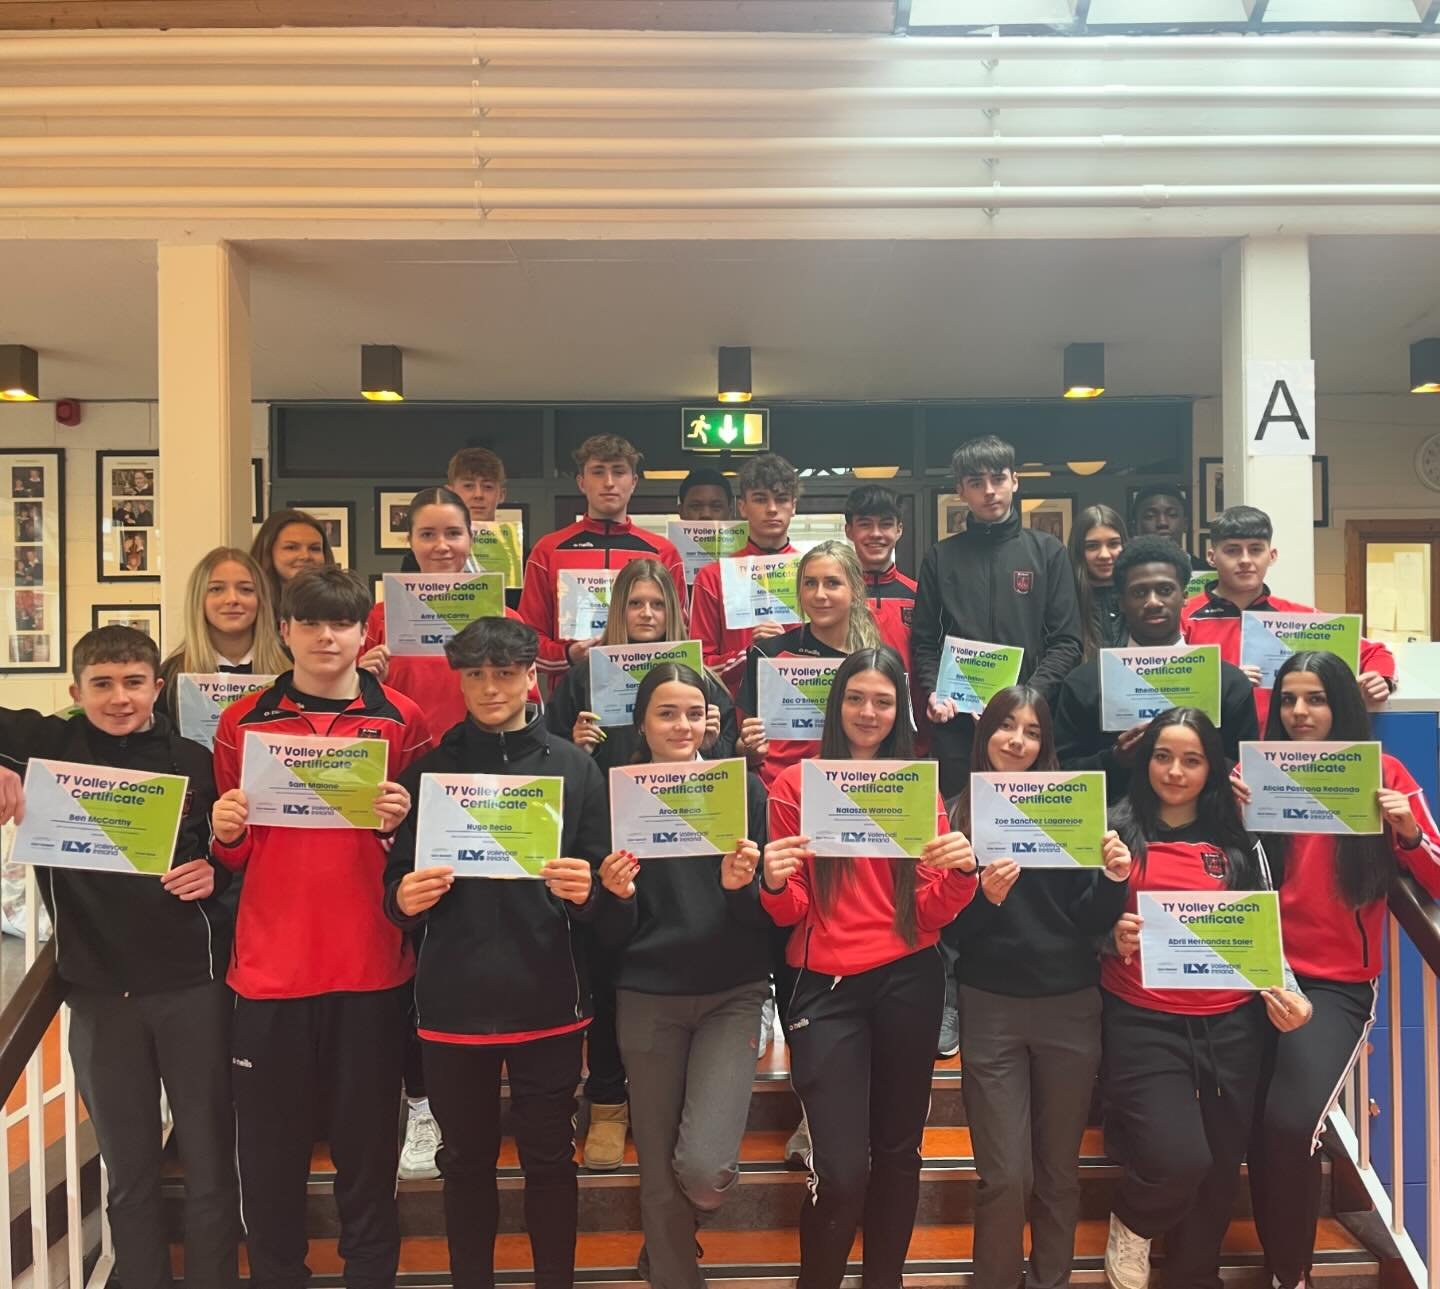 Well done to our Newly Qualified Student Volleyball Coaches, who received their @volleyballireland Certificates during the week! 💪 Well done everyone, looking forward to seeing your coaching skills soon in our local primary schools! 👏🏐 #stpeters #